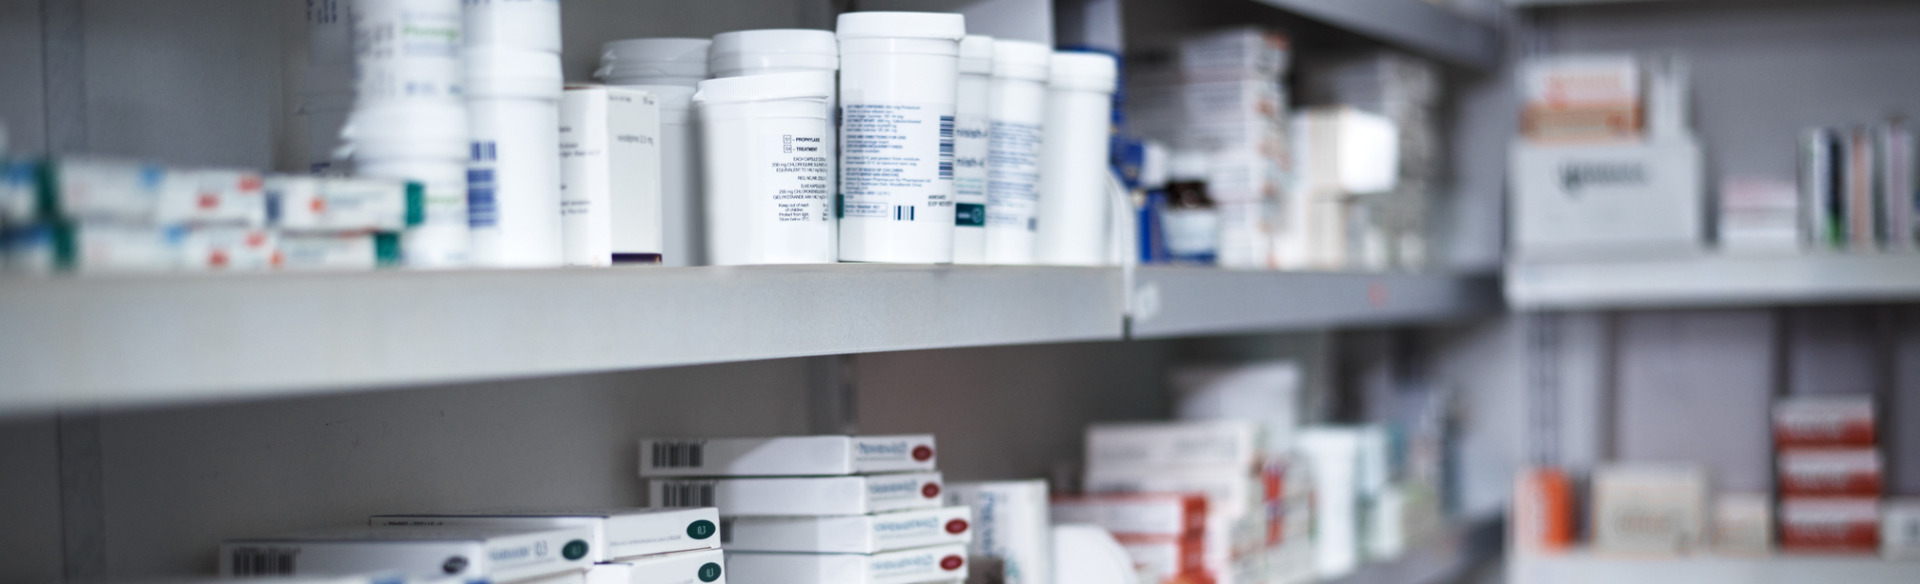 retail pharmacy shelf with various medications